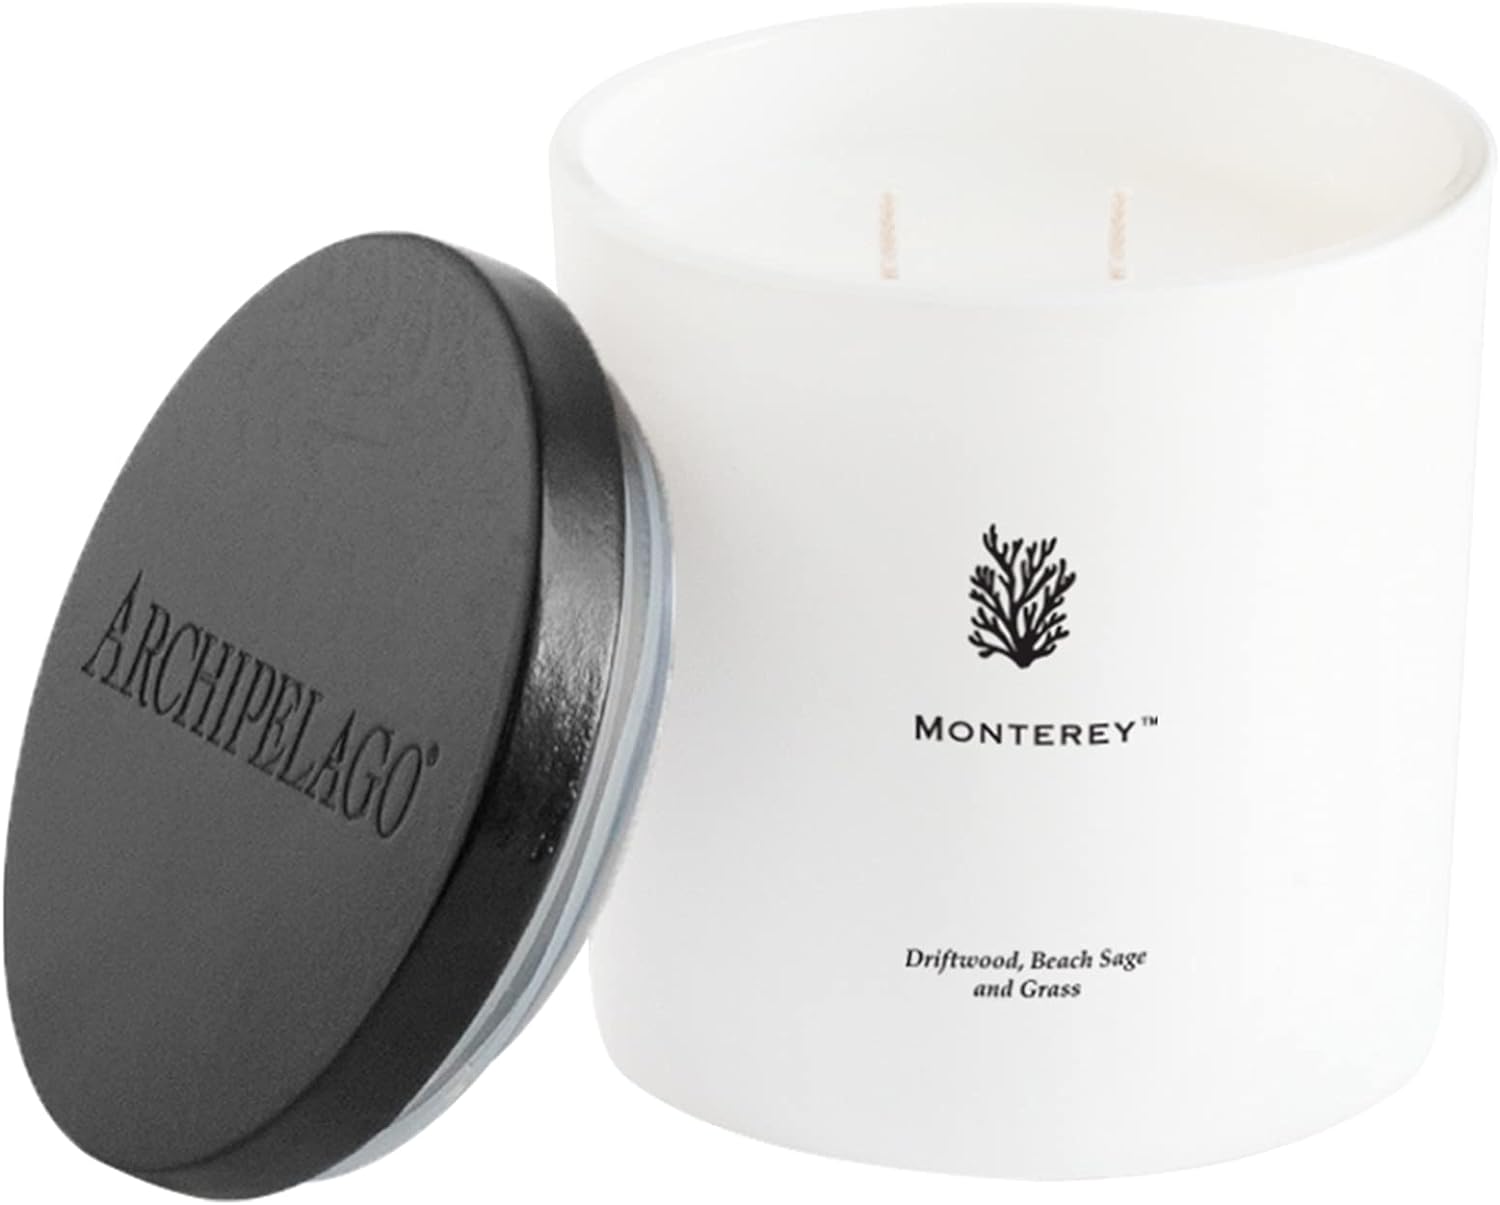 Archipelago Botanicals Monterey Luxe Candle. Relaxing Ocean Scent of Driftwood, Beach Sage and Beach Grass in an Elegant White Glass Jar. Coconut Wax and Double Wicks Burn 100 Hours (13 oz)